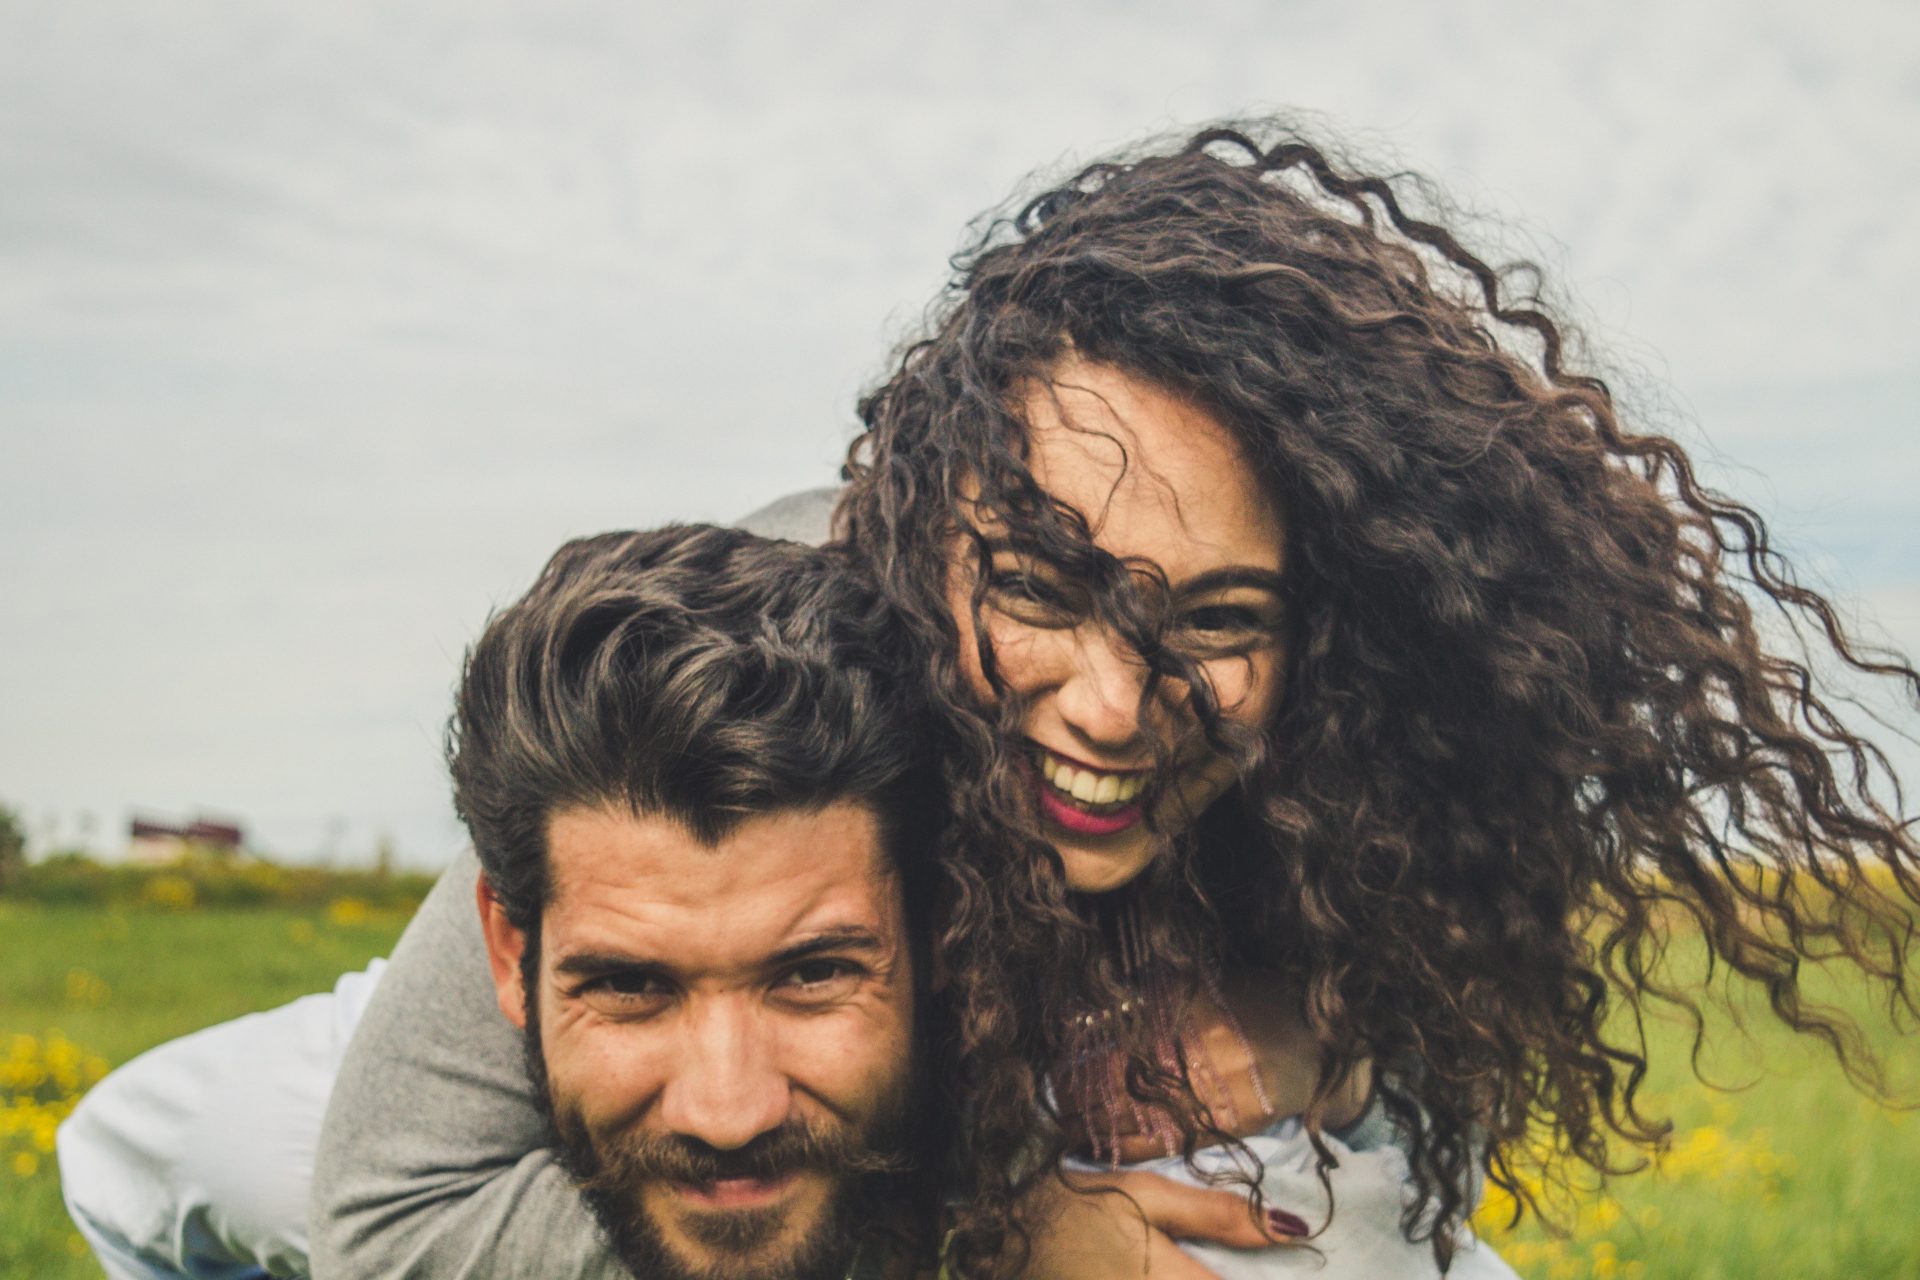 35 Men On The Most Mushy, Thoughtful, Romantic Thing A Woman Has Ever Done For Them